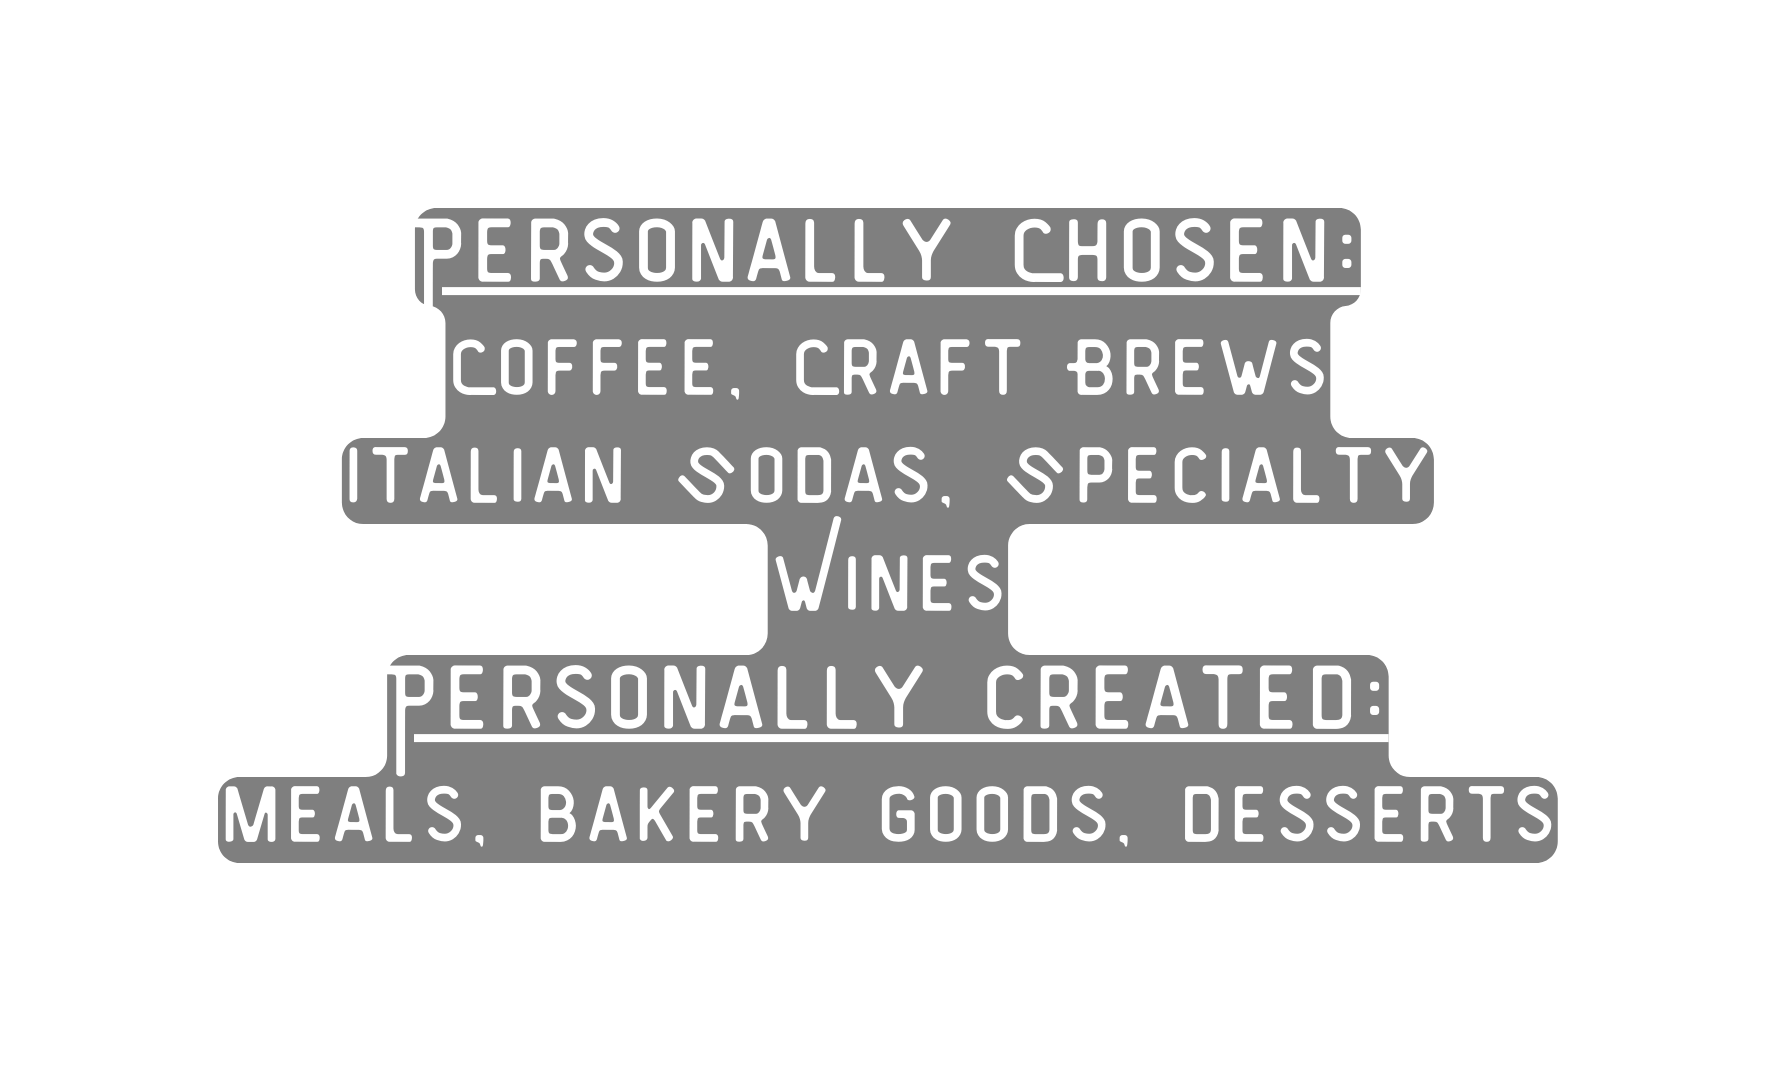 Personally Chosen Coffee Craft Brews Italian Sodas Specialty Wines Personally created meals bakery goods desserts